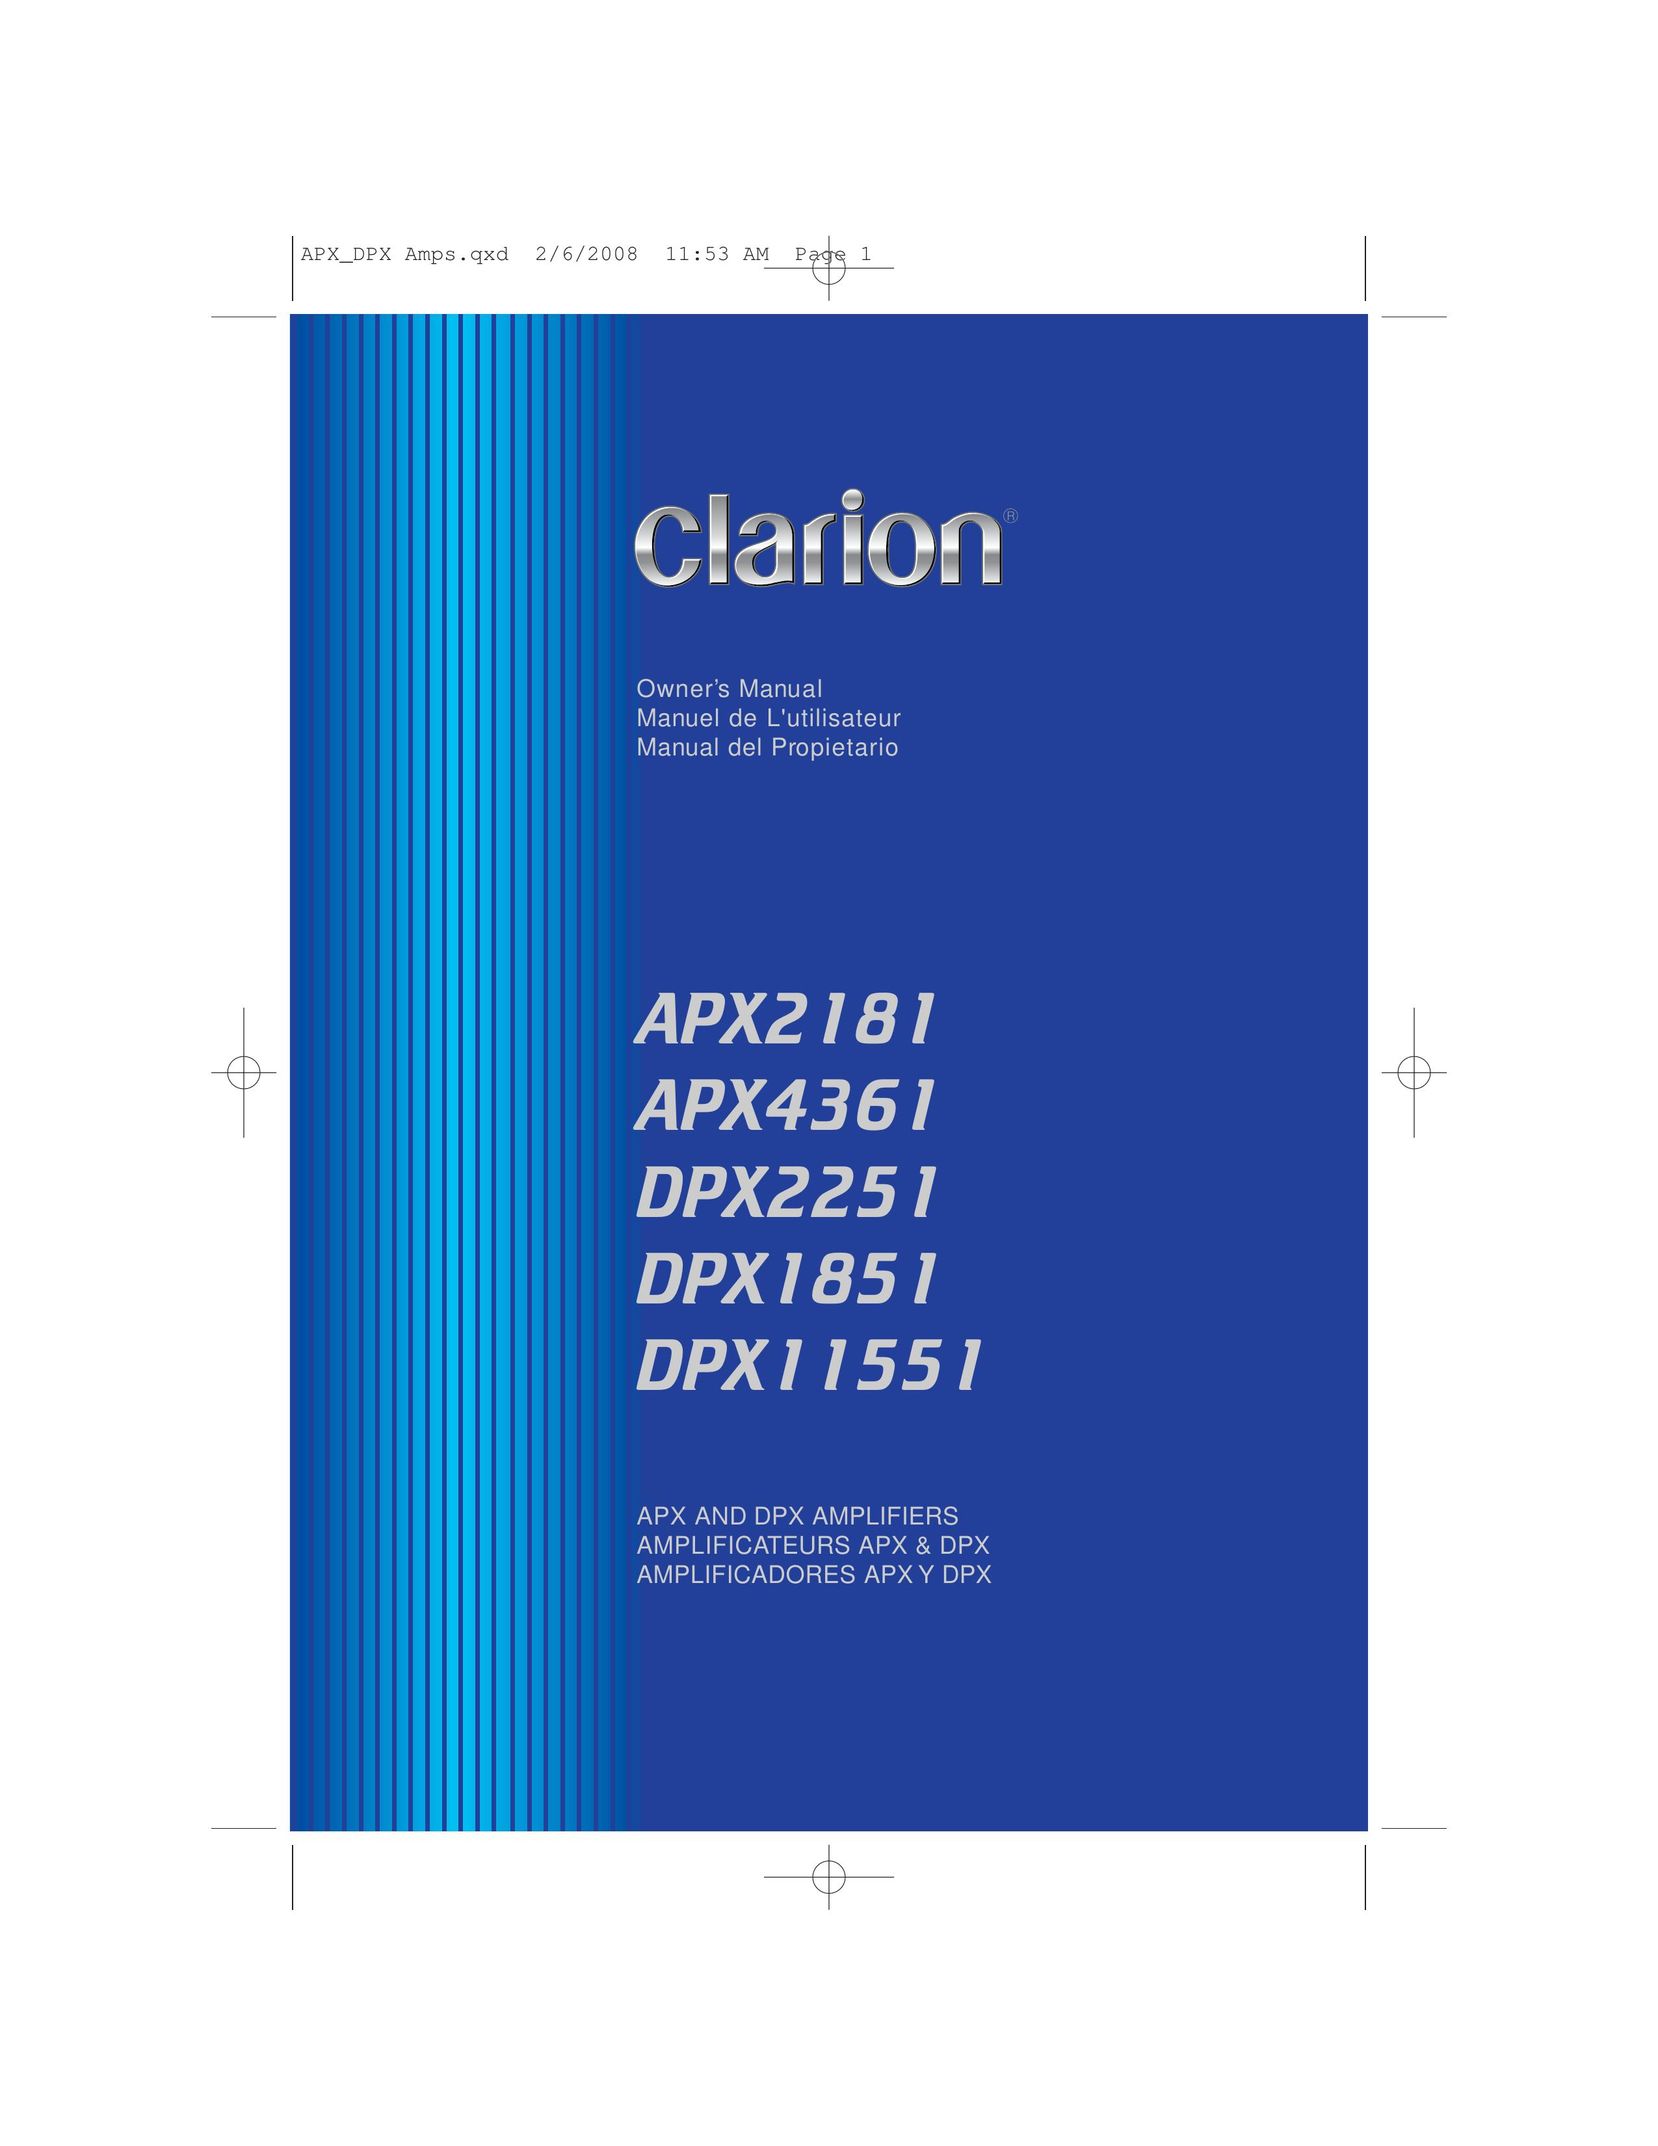 Clarion APX2181 Car Amplifier User Manual